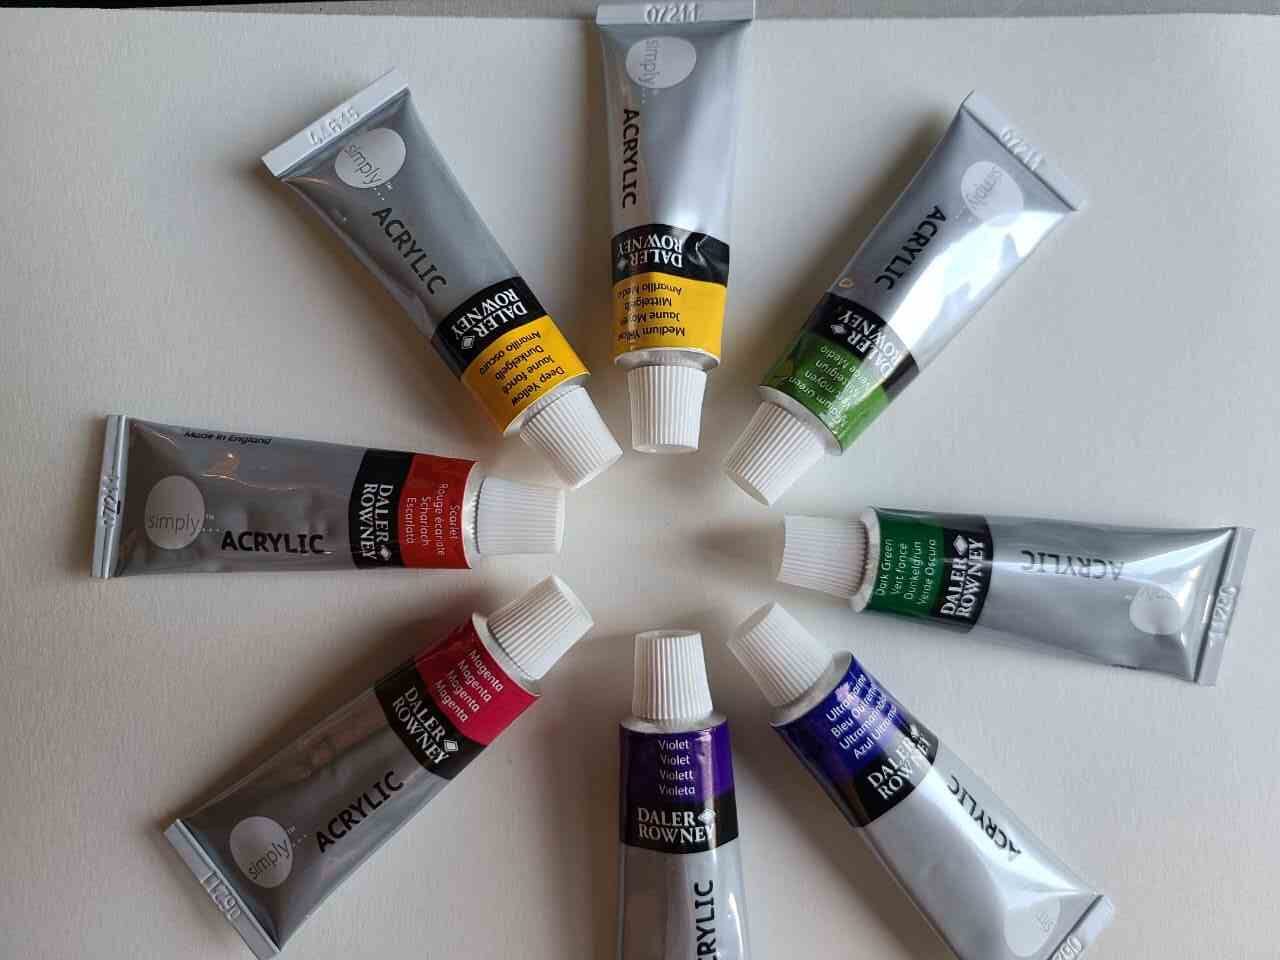 daler rowney acrylic paint review 